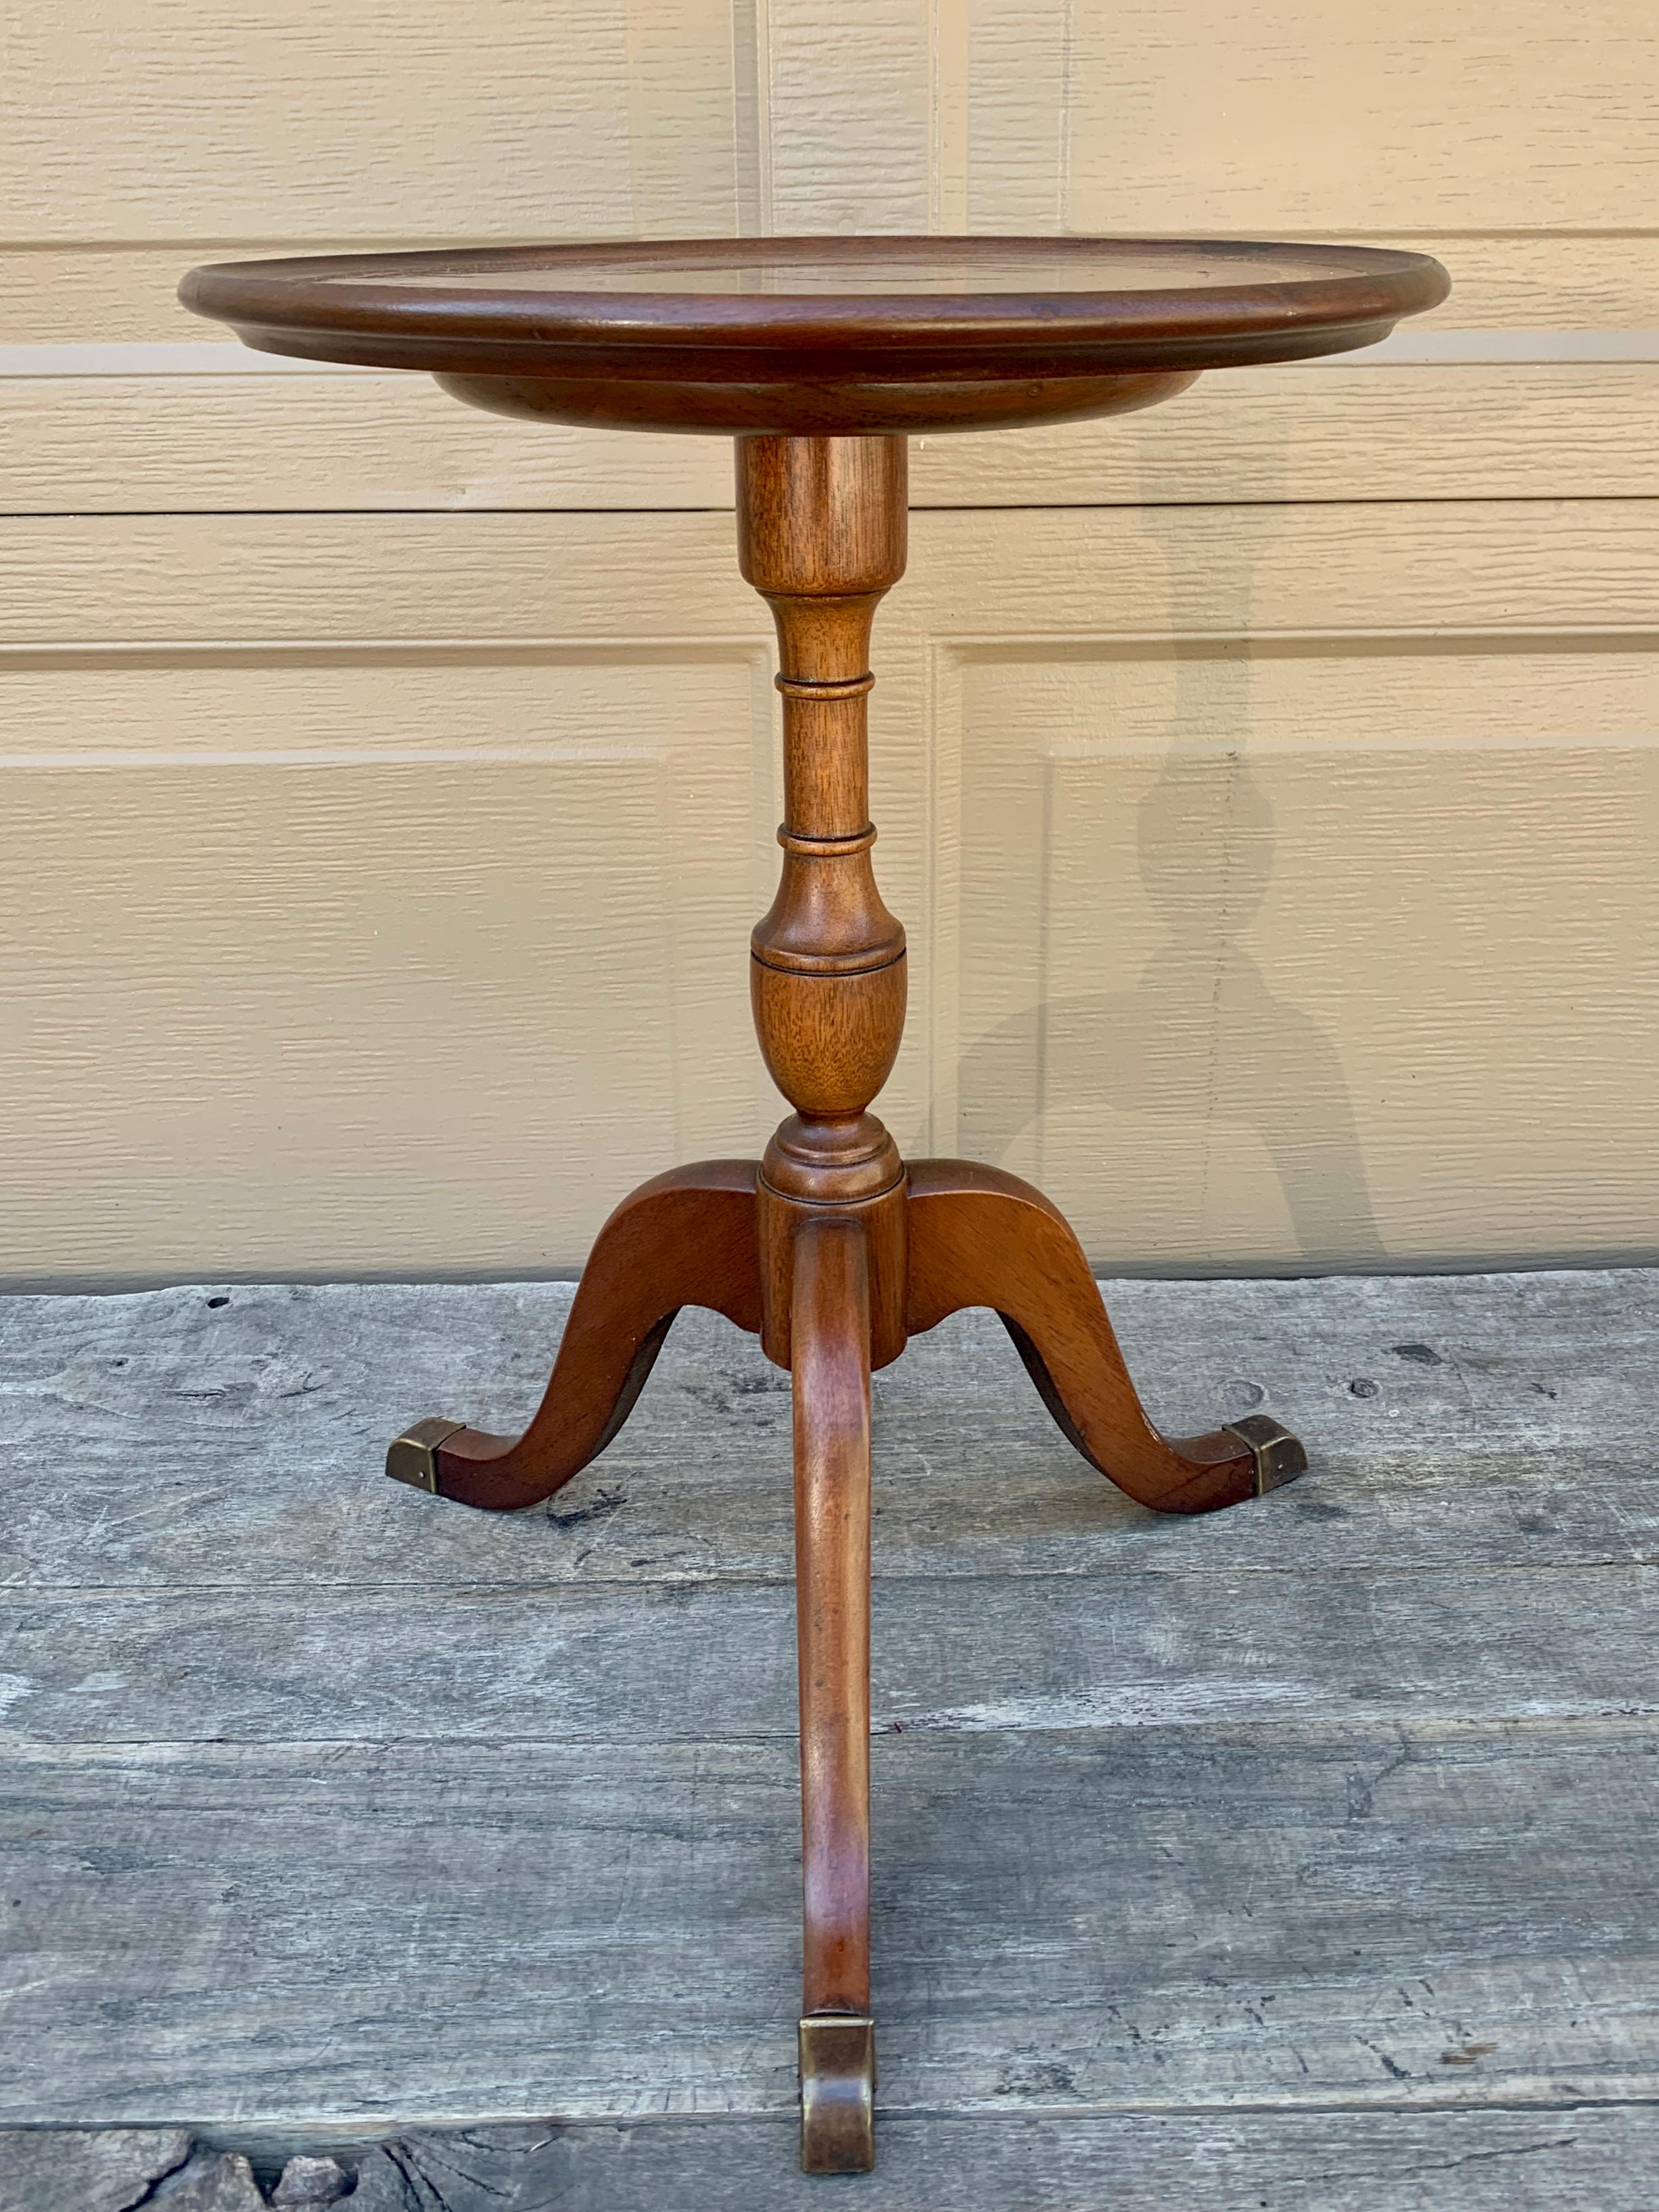 A gorgeous Georgian style round side table or drinks table

USA, Mid-20th Century

Carved mahogany, with embossed leather top

Measures: 14